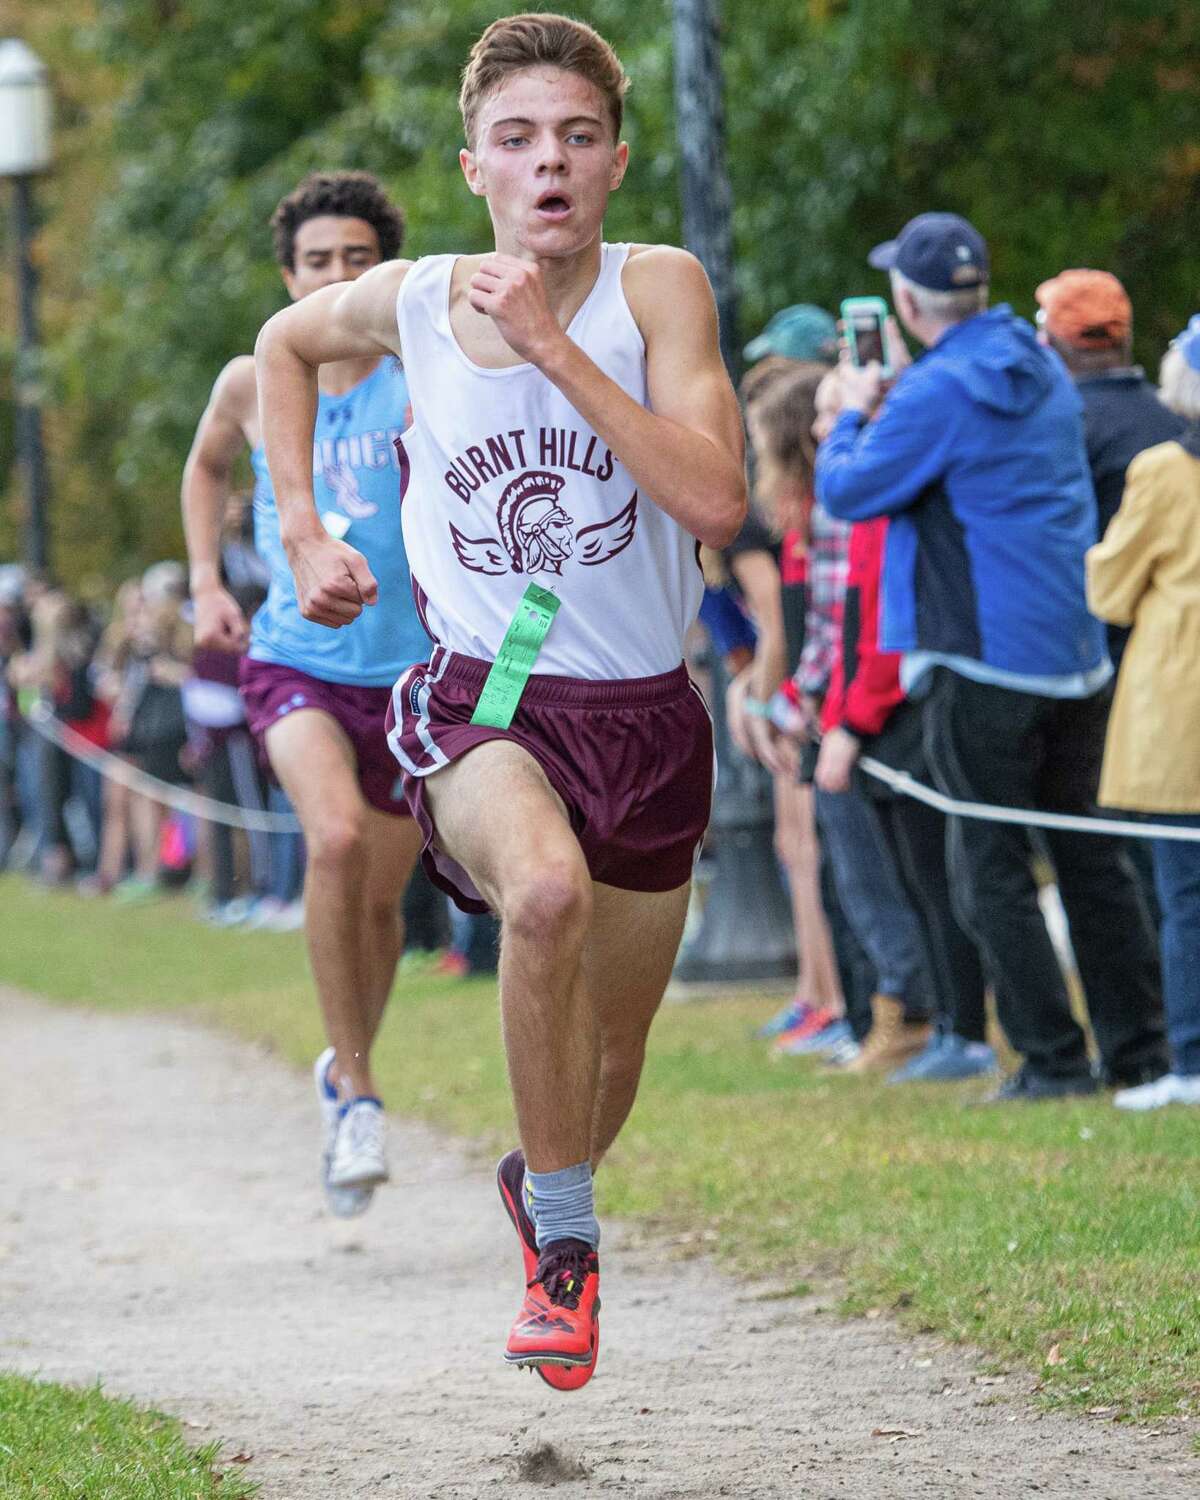 Ryan Allison, of Burnt Hills Ballston Lake High School, finishes fourth in the boys Division III cross country race of the 38th Annual Burnt Invitational held at the Saratoga Spa State Park on Saturday, Oct. 12, 2019 (Jim Franco/Special to the Times Union.)